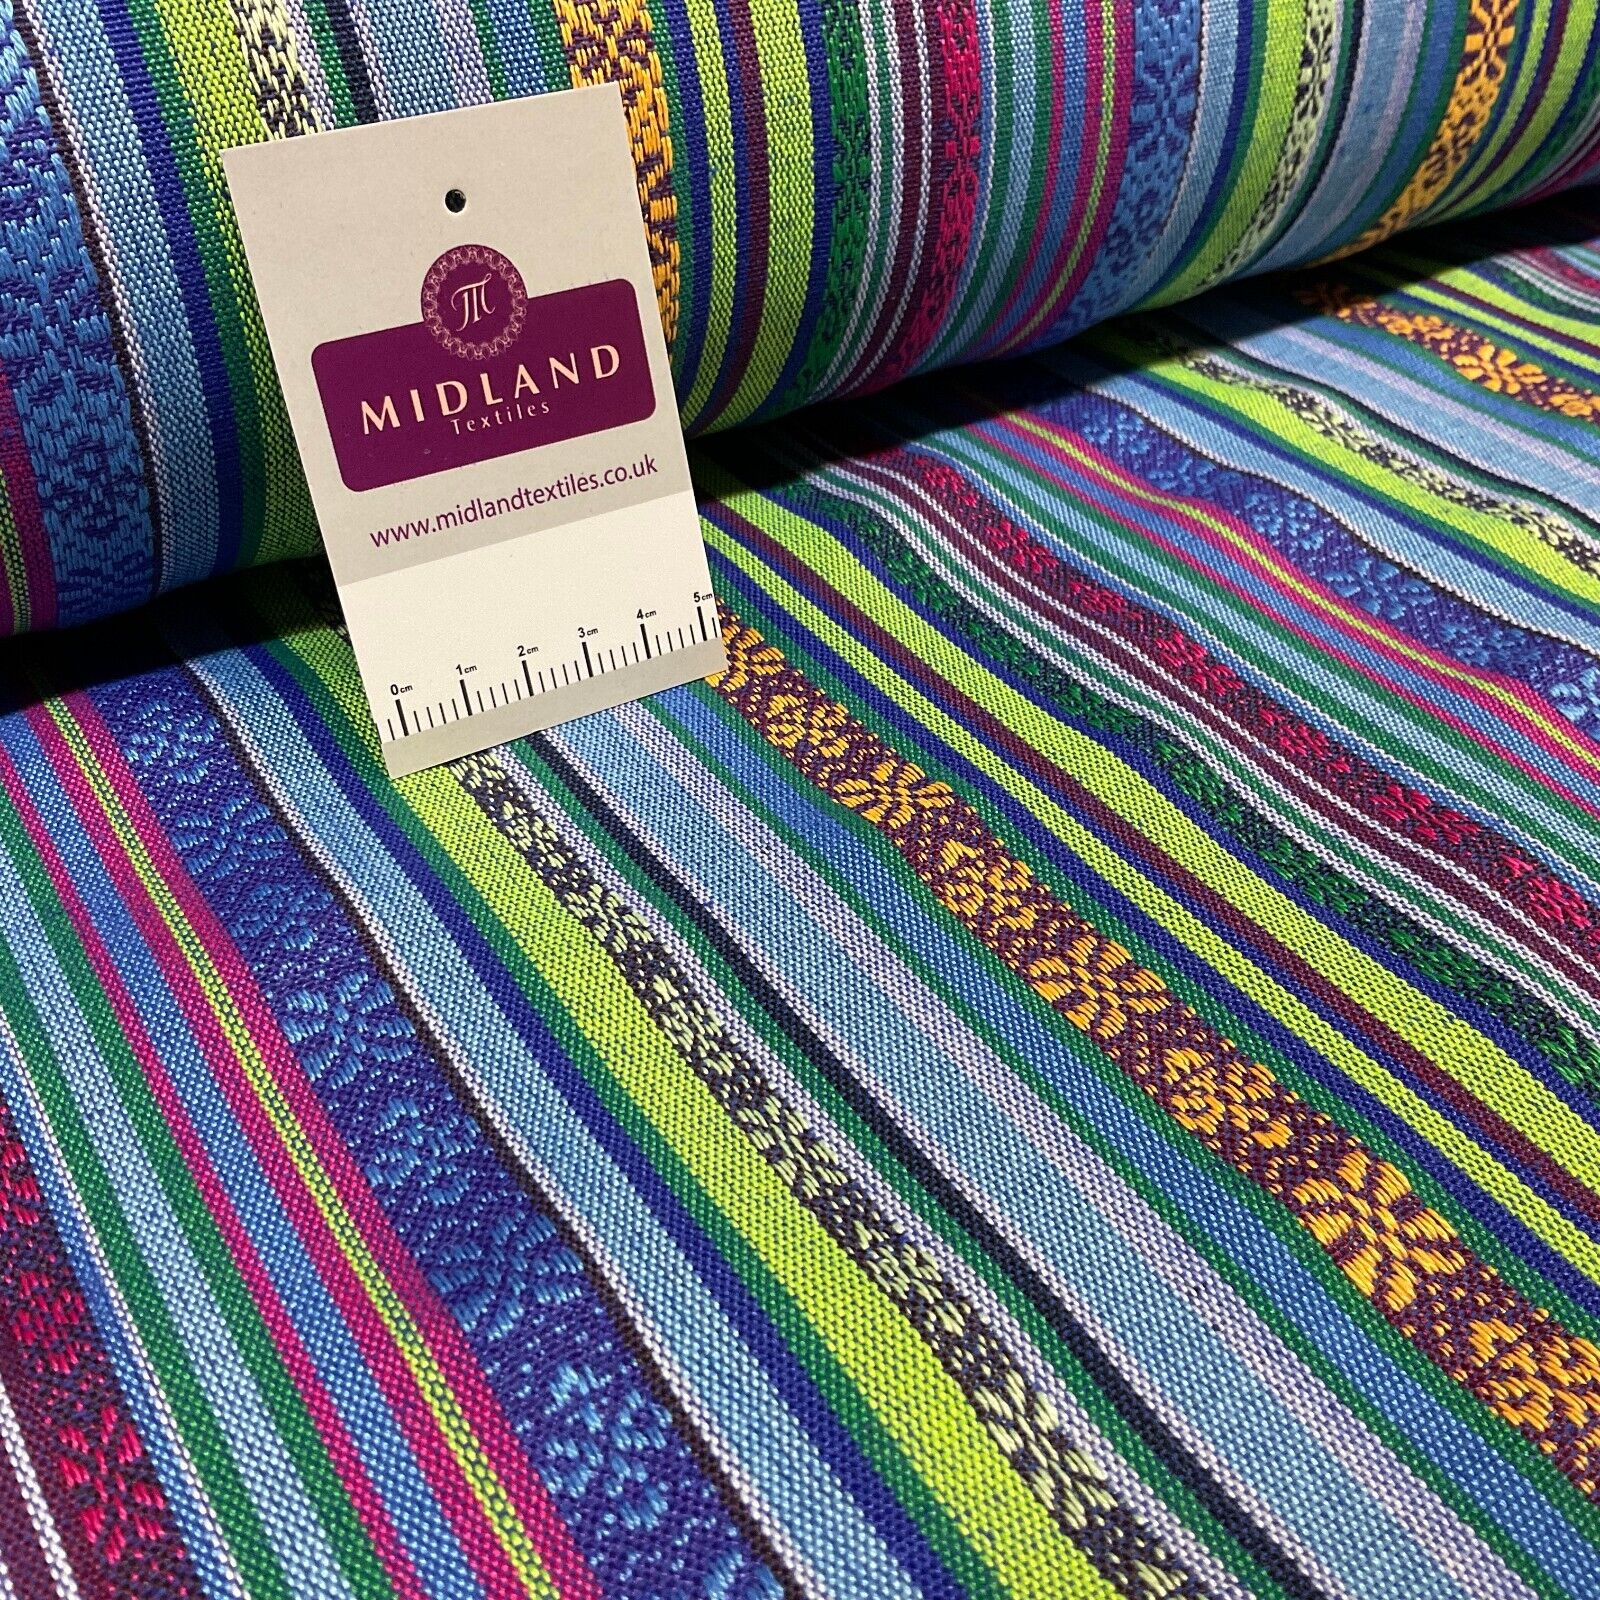 Mexicana Striped Tapestry Upholstery Furniture Curtain cushion fabric M1792